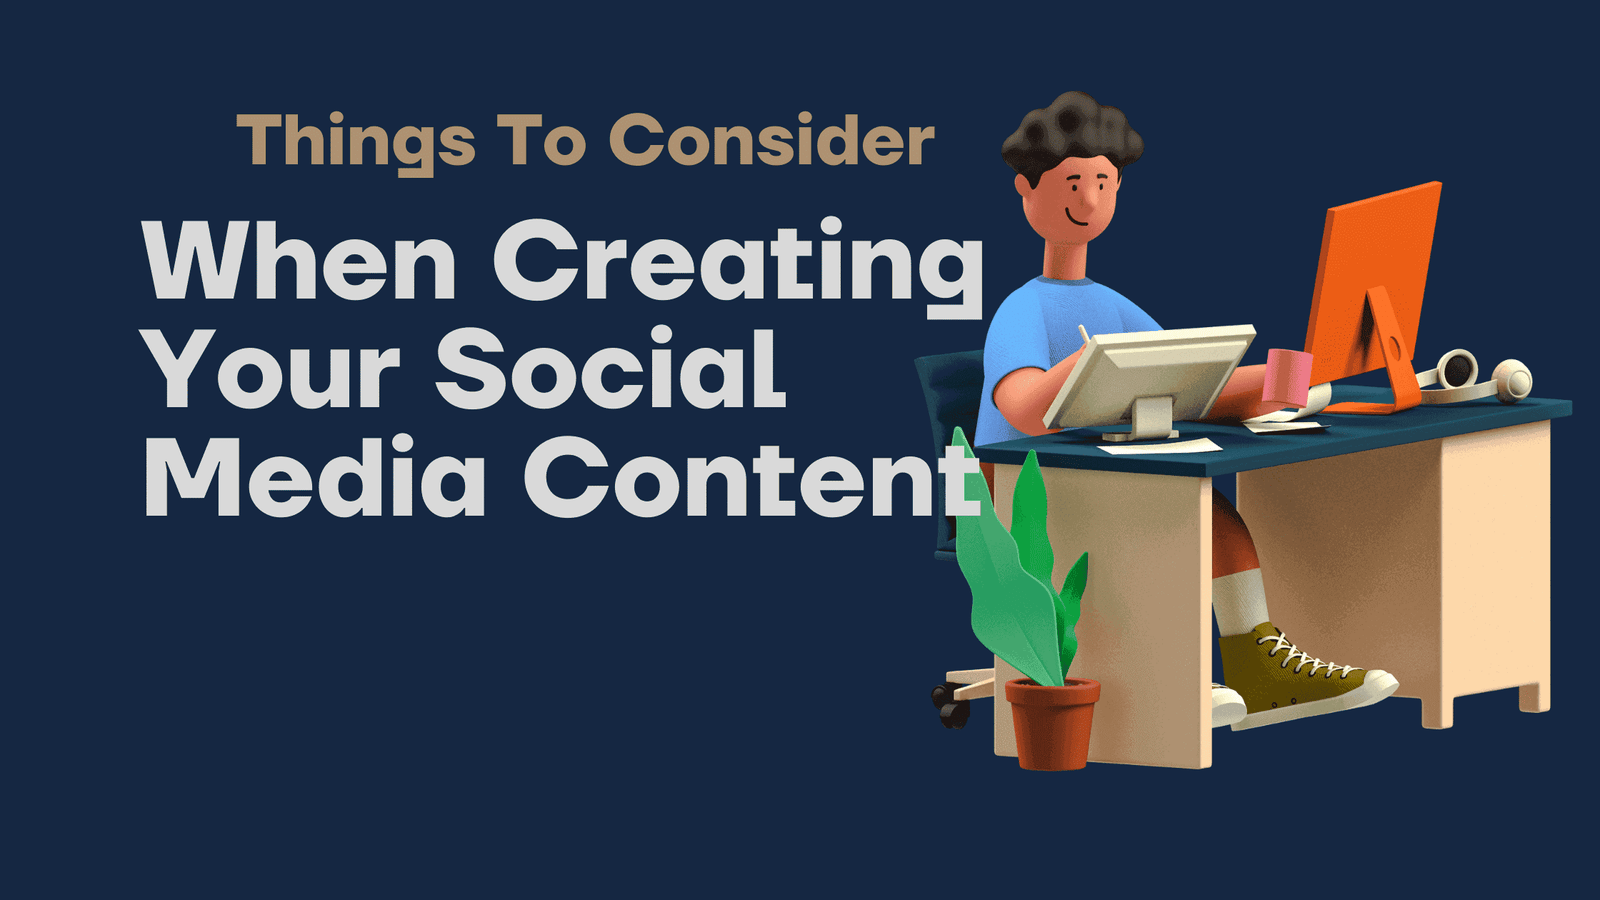 Things to Consider When Creating Your Social Media Content